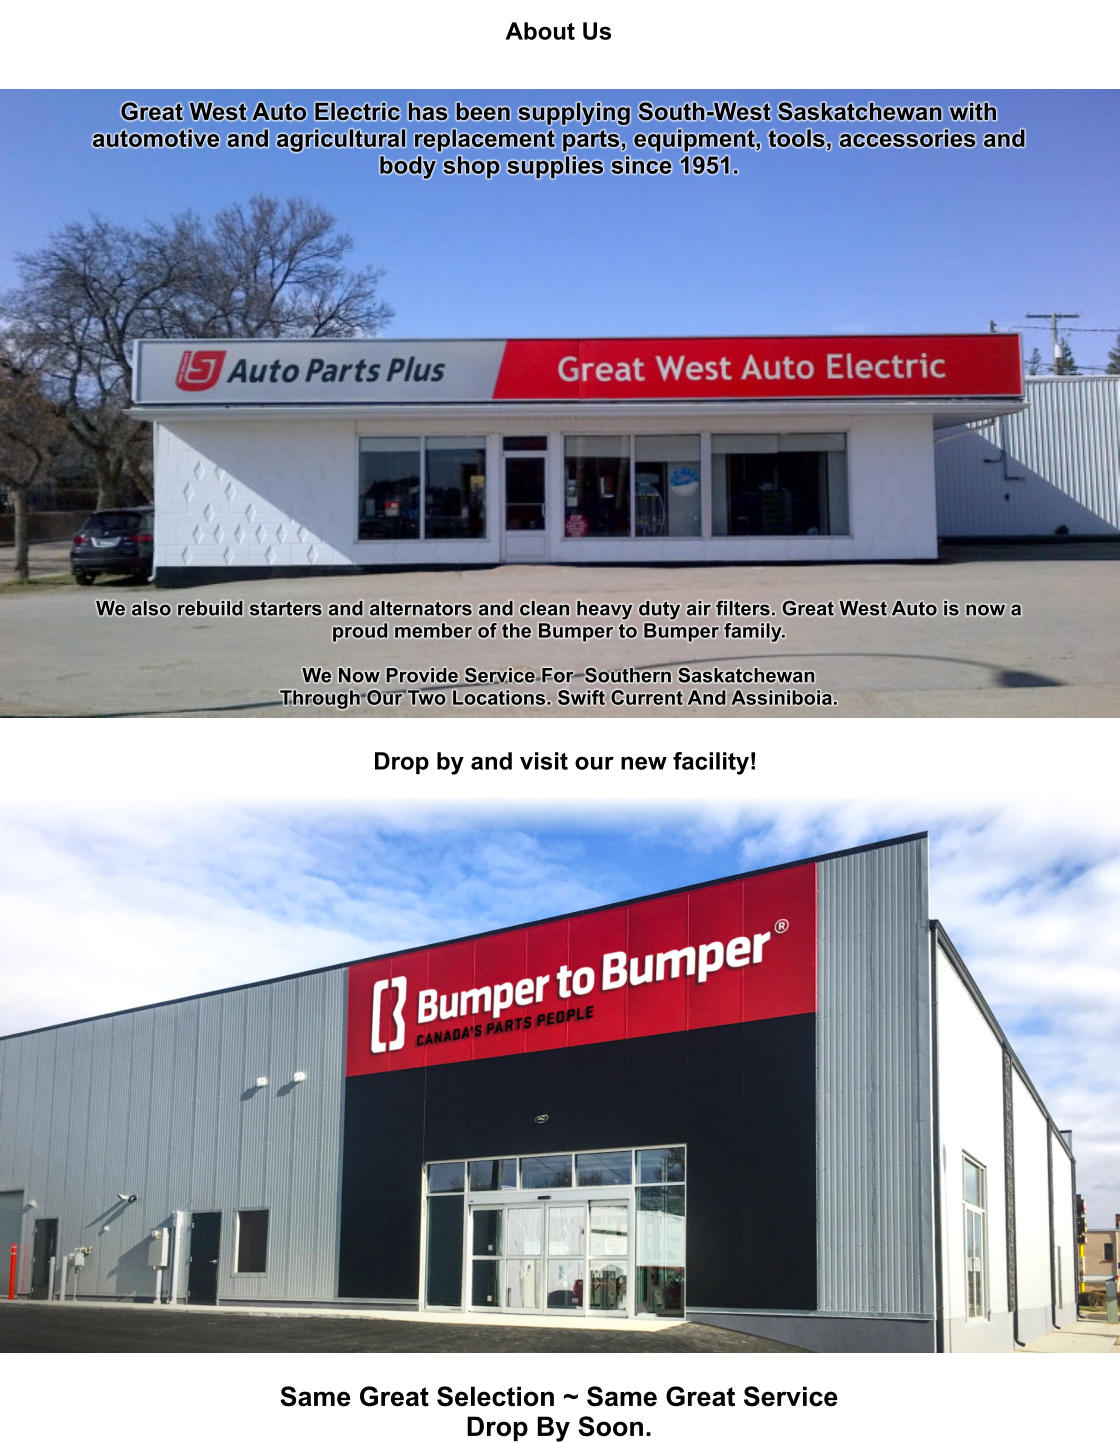 About Us   Great West Auto Electric has been supplying South-West Saskatchewan with automotive and agricultural replacement parts, equipment, tools, accessories and body shop supplies since 1951.                                 We also rebuild starters and alternators and clean heavy duty air filters. Great West Auto is now a proud member of the Bumper to Bumper family.  We Now Provide Service For  Southern Saskatchewan Through Our Two Locations. Swift Current And Assiniboia. Same Great Selection ~ Same Great Service Drop By Soon. Drop by and visit our new facility!